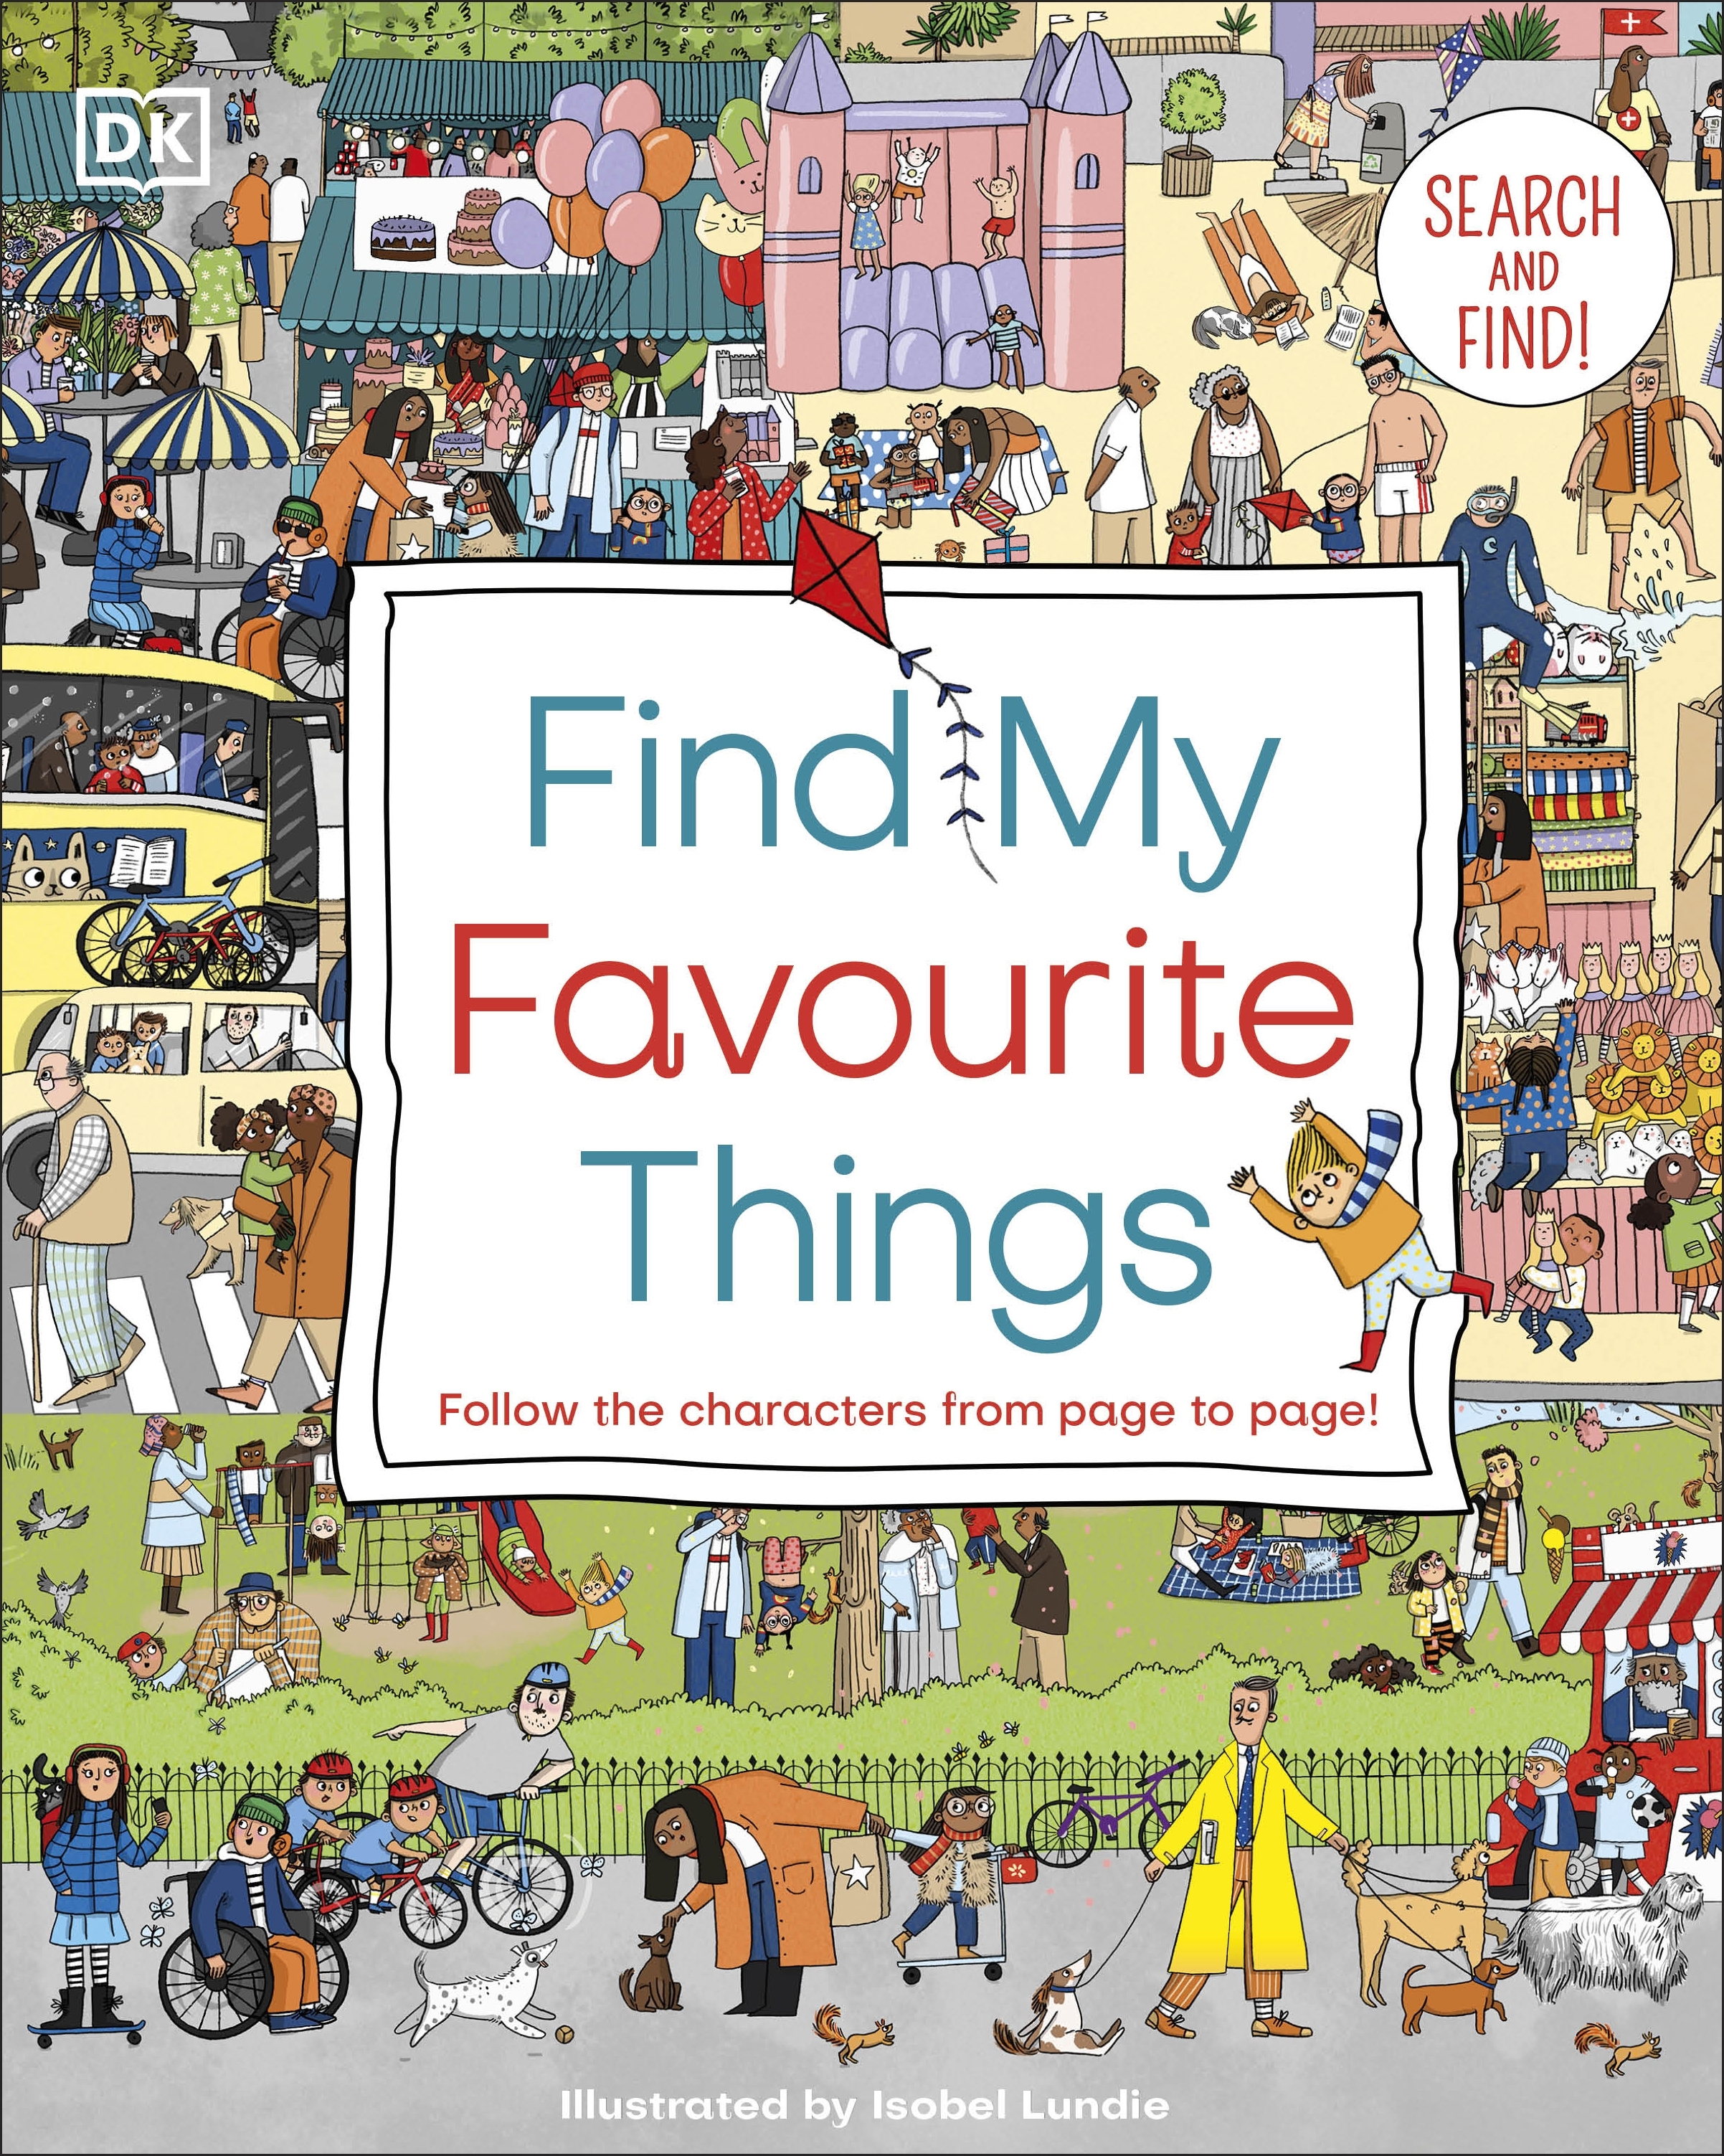 Find My Favourite Things By Dk Penguin Books New Zealand 